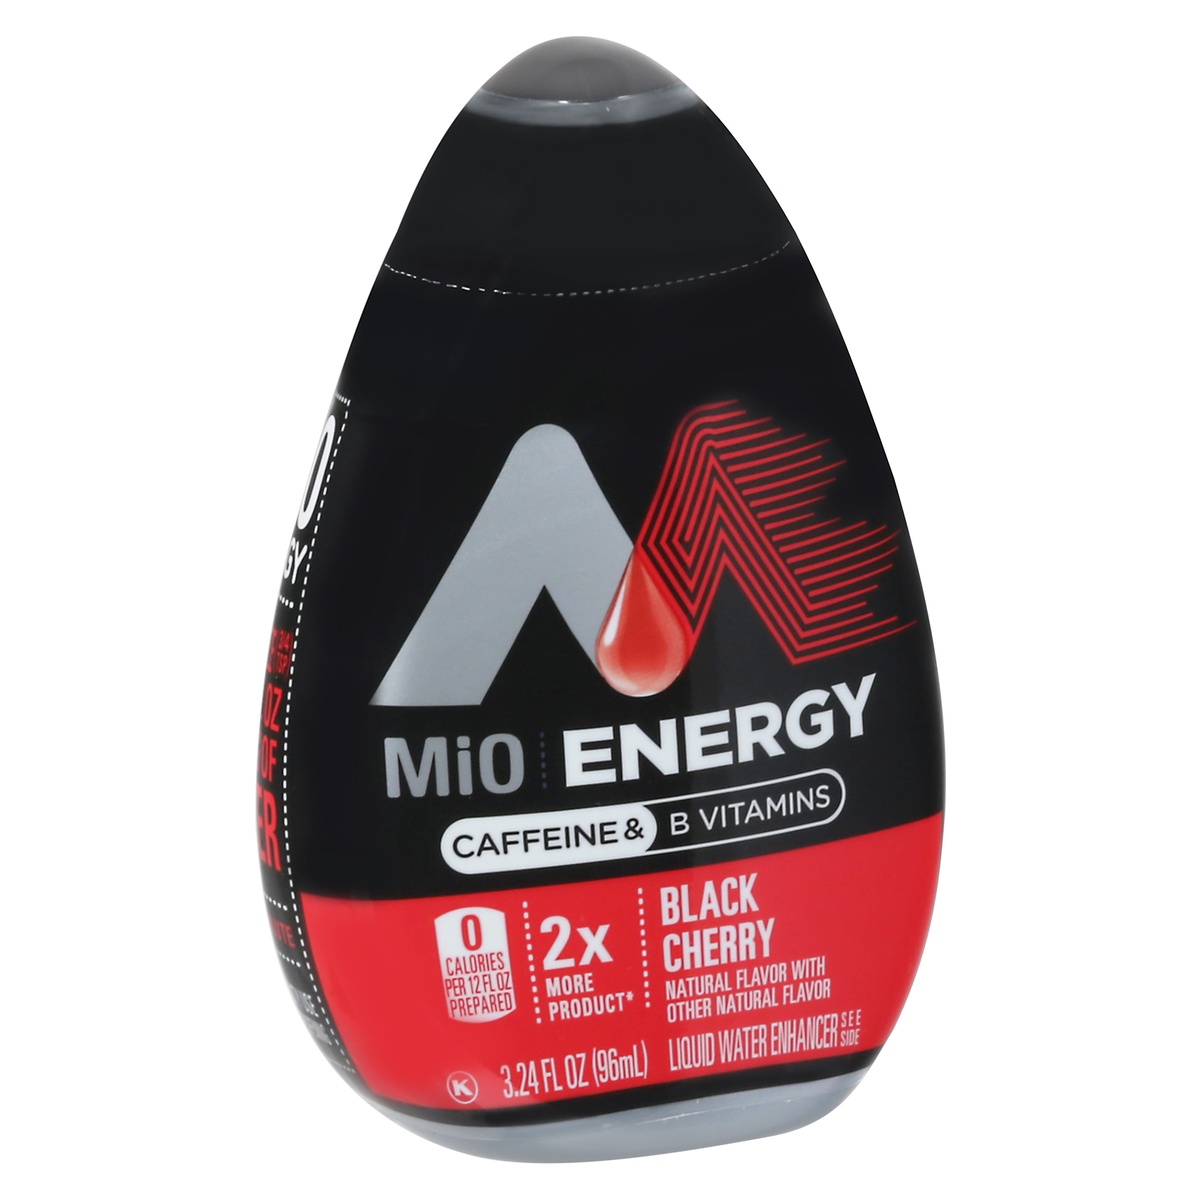 slide 2 of 11, Mio Energy Black Cherry Naturally Flavored Liquid Water Enhancer With 2X More Bottle, 3.24 fl oz